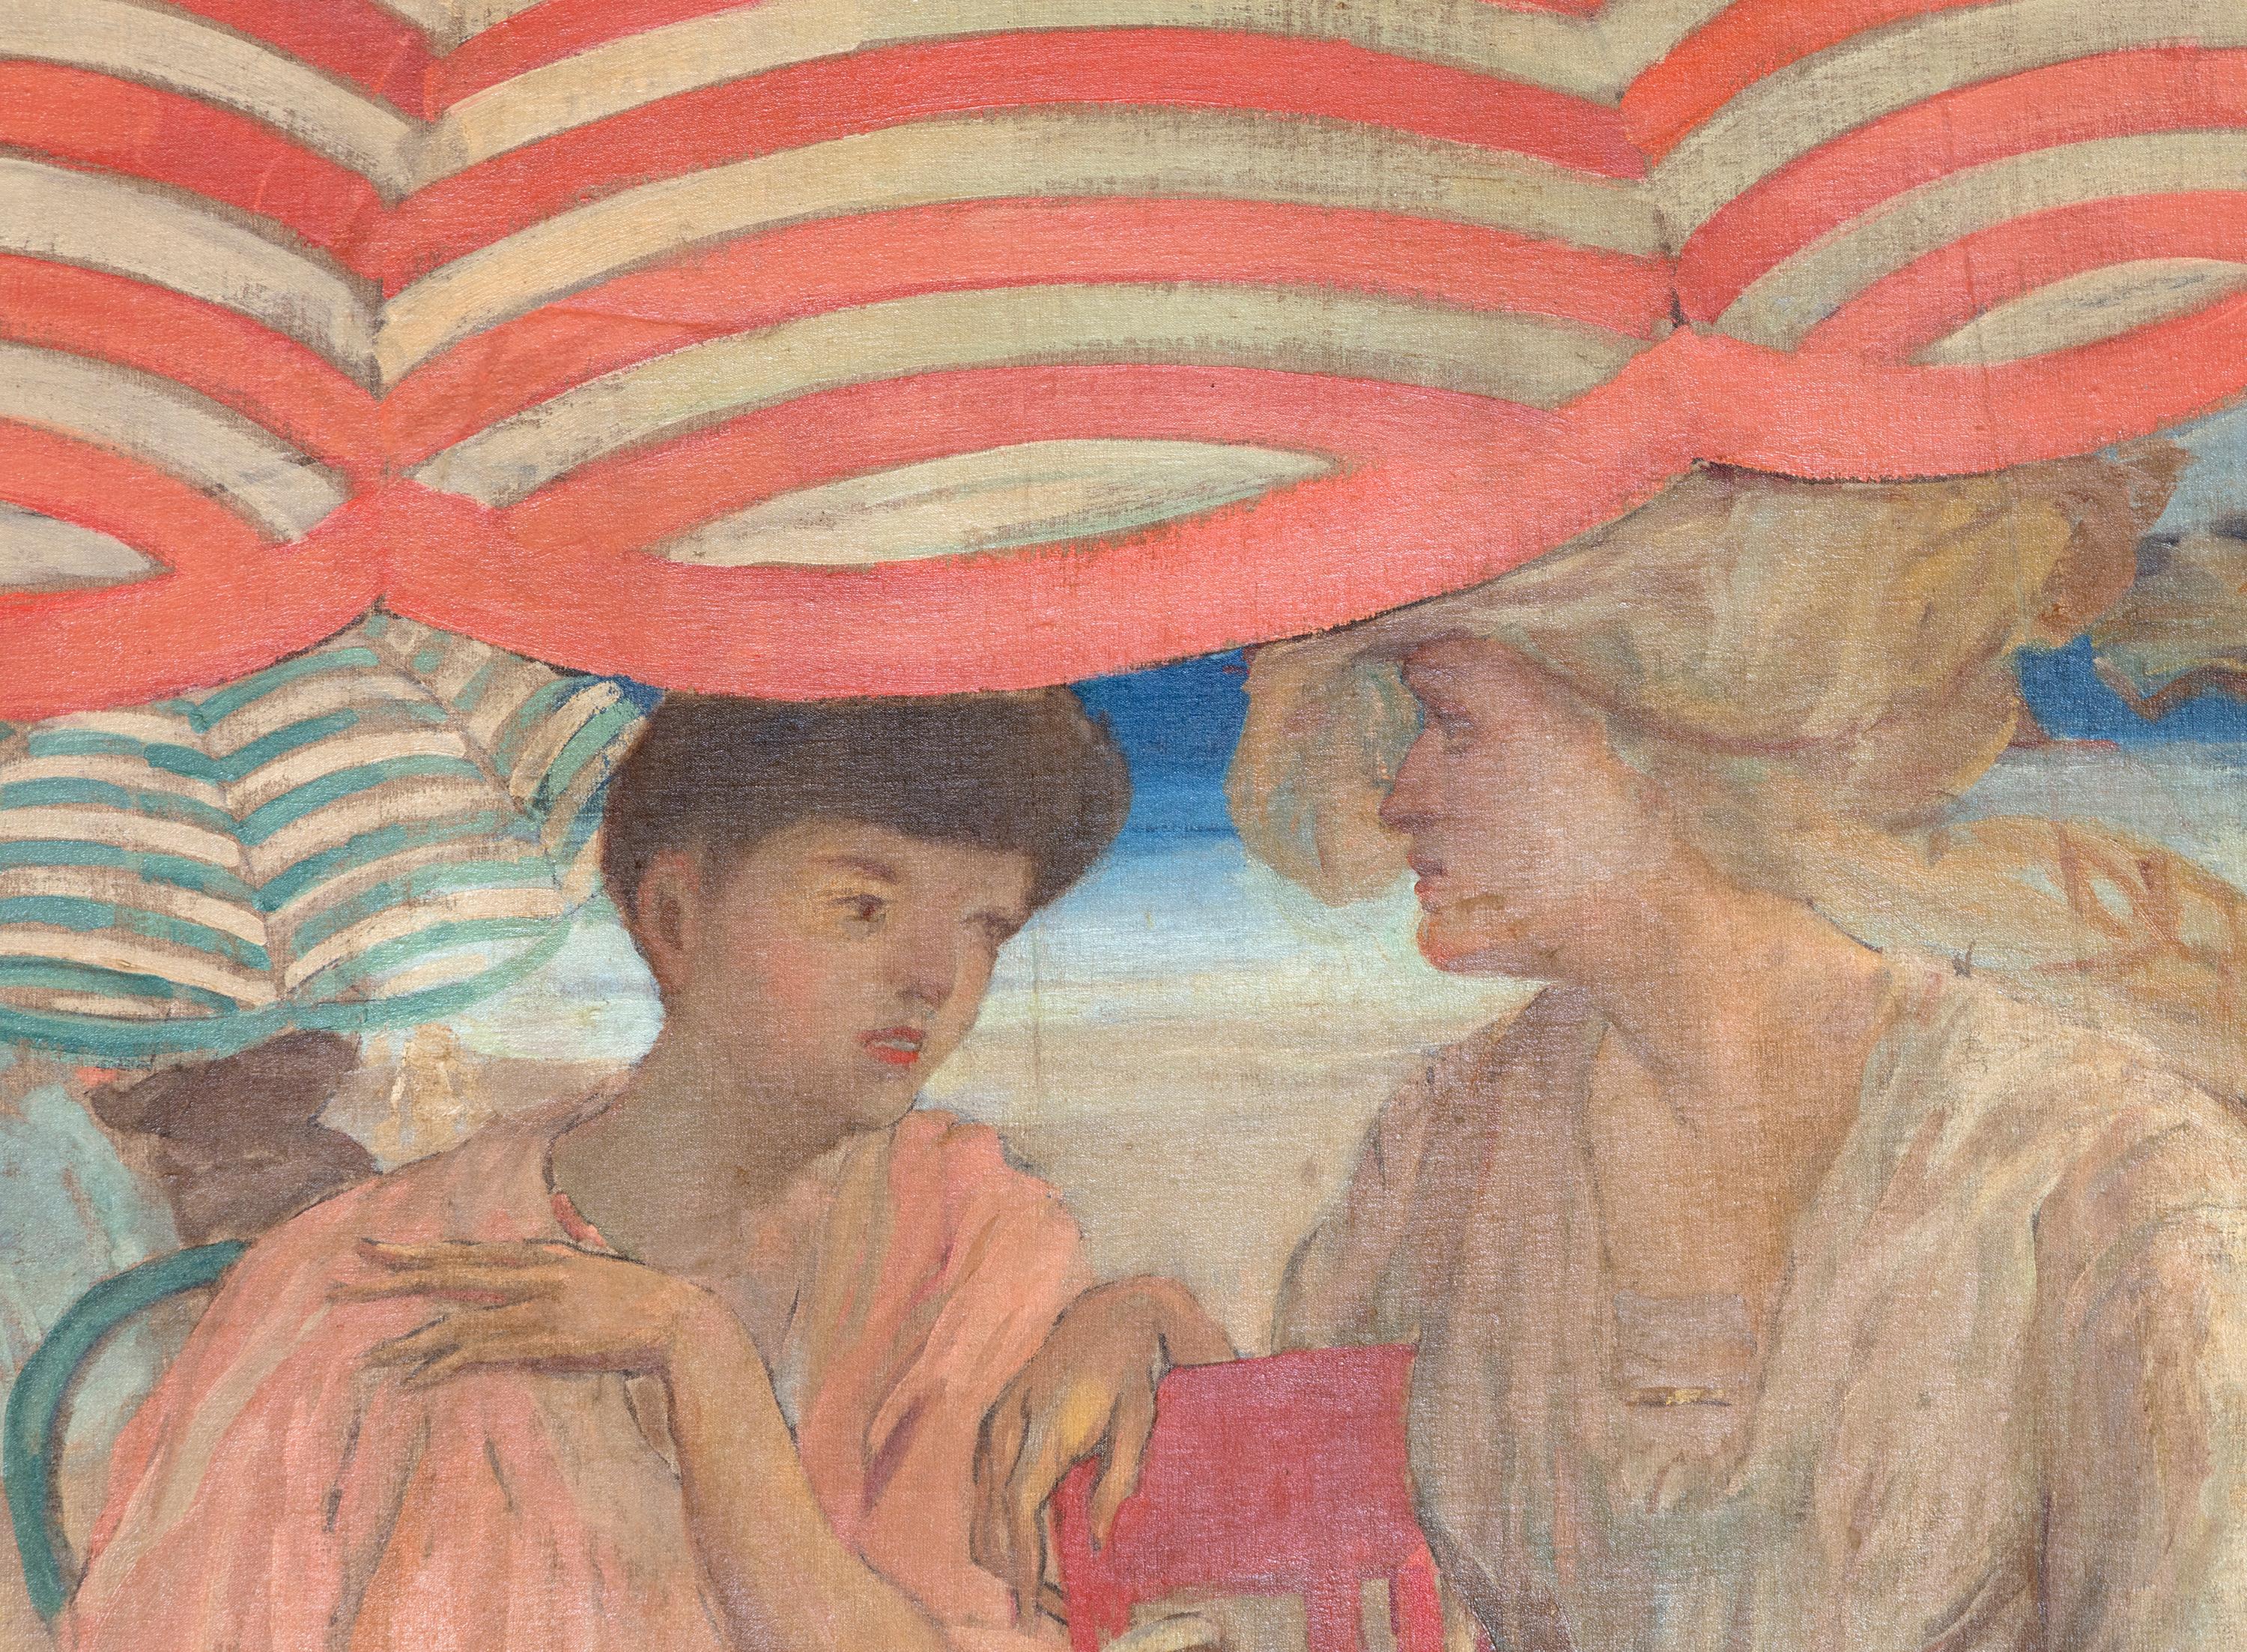 Under the Striped Umbrella - Brown Figurative Painting by Frederick Carl Frieseke